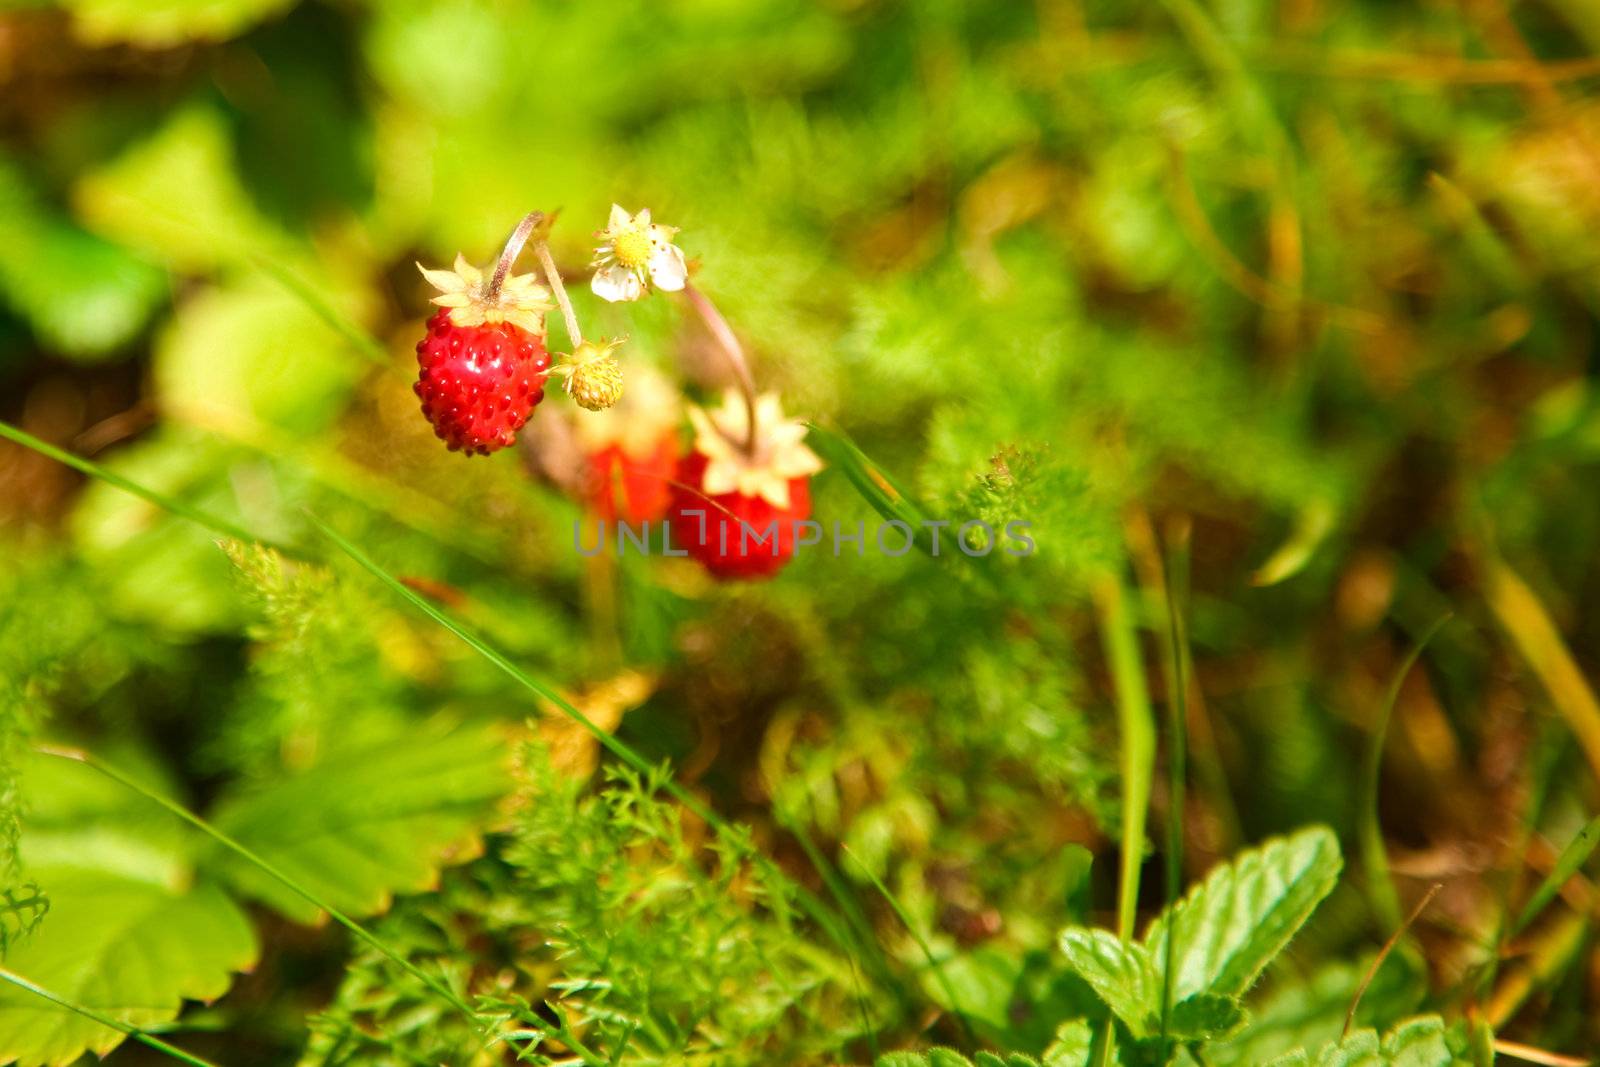 Stock photo: nature: an image of a red berries